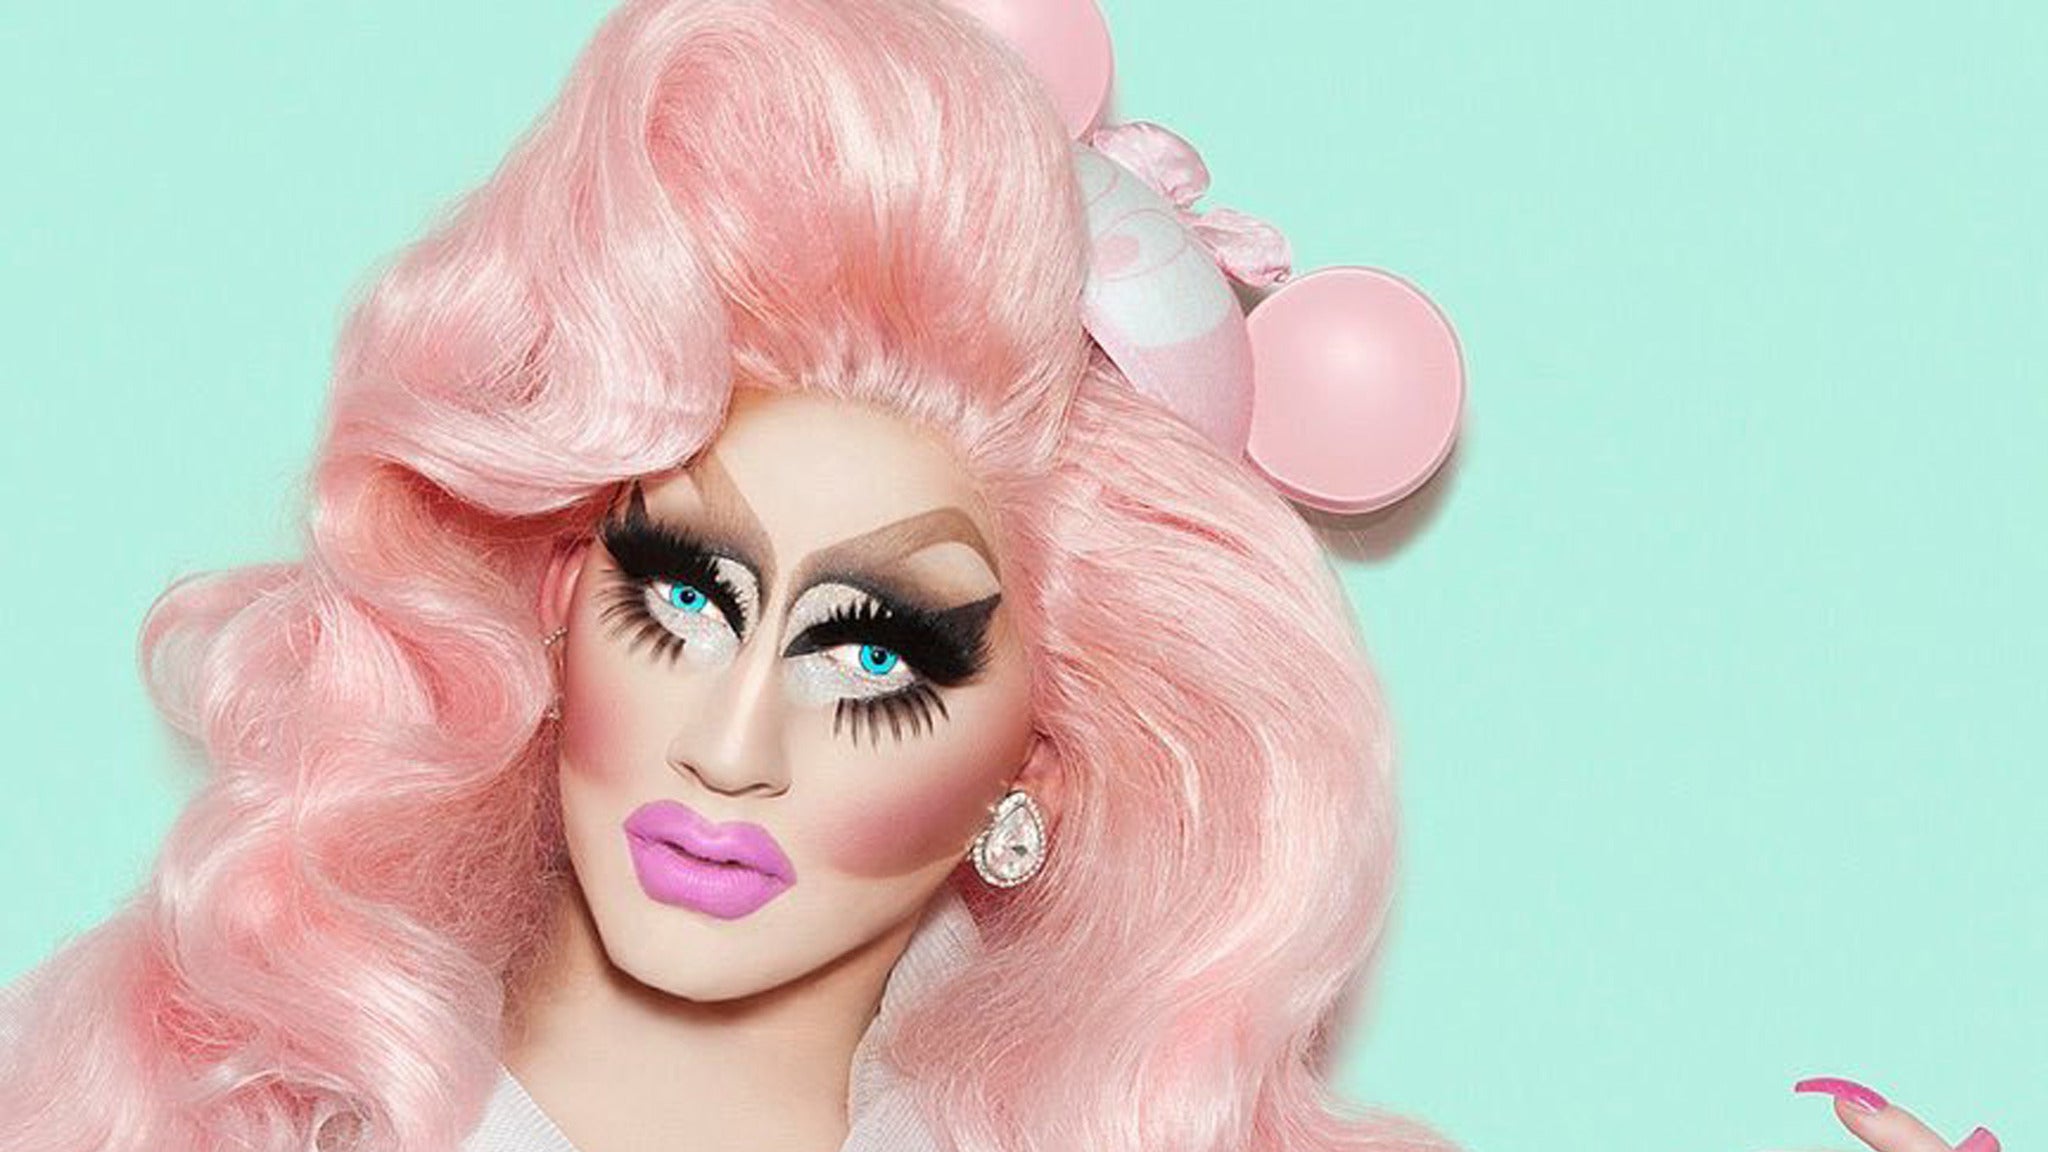 Trixie Mattel: Grown Up in Pittsburgh promo photo for Meet & Greet Experiences presale offer code